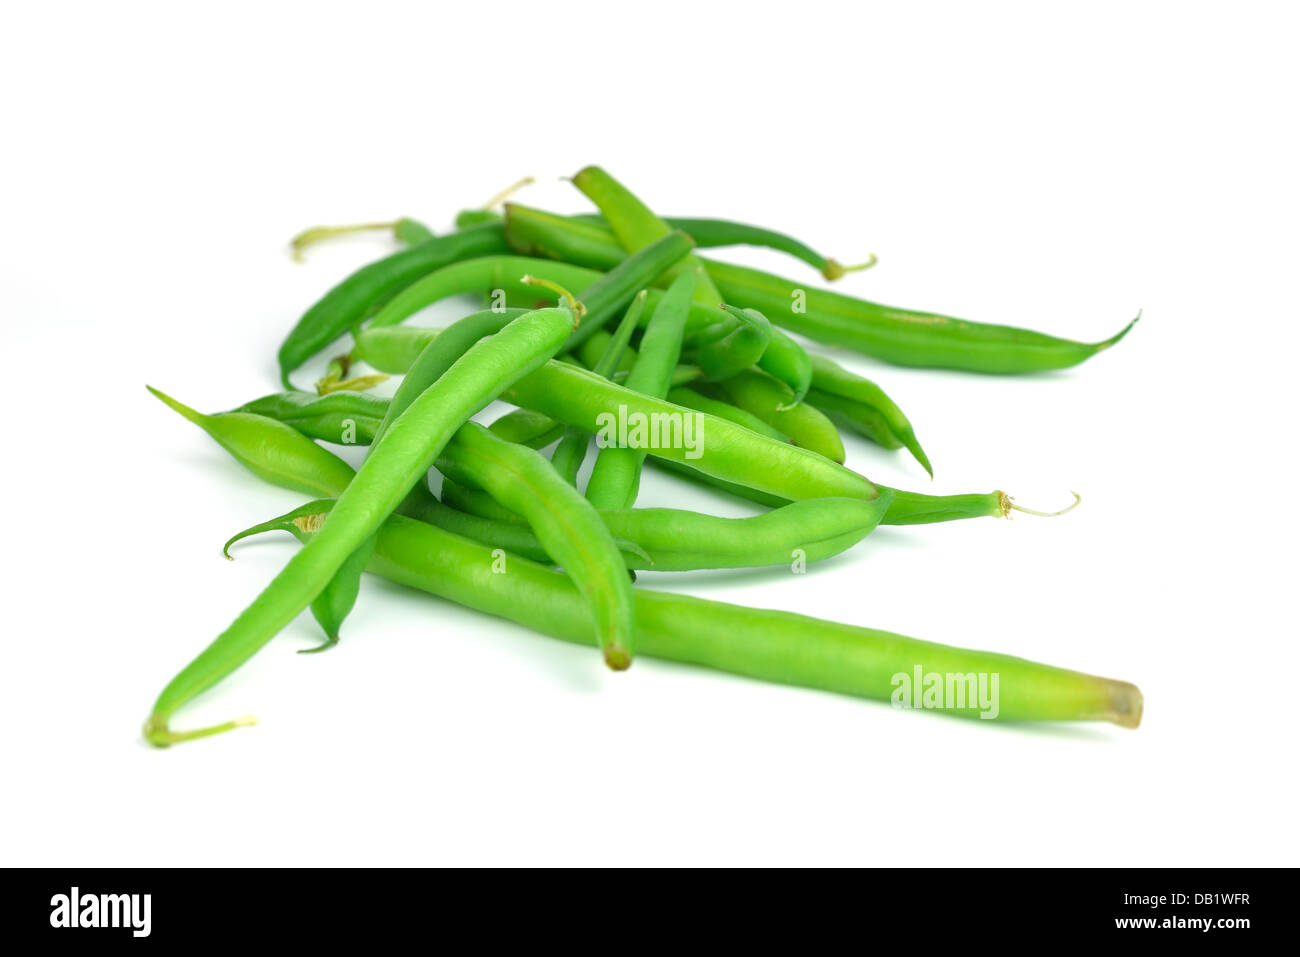 A pile of green bean pods Stock Photo